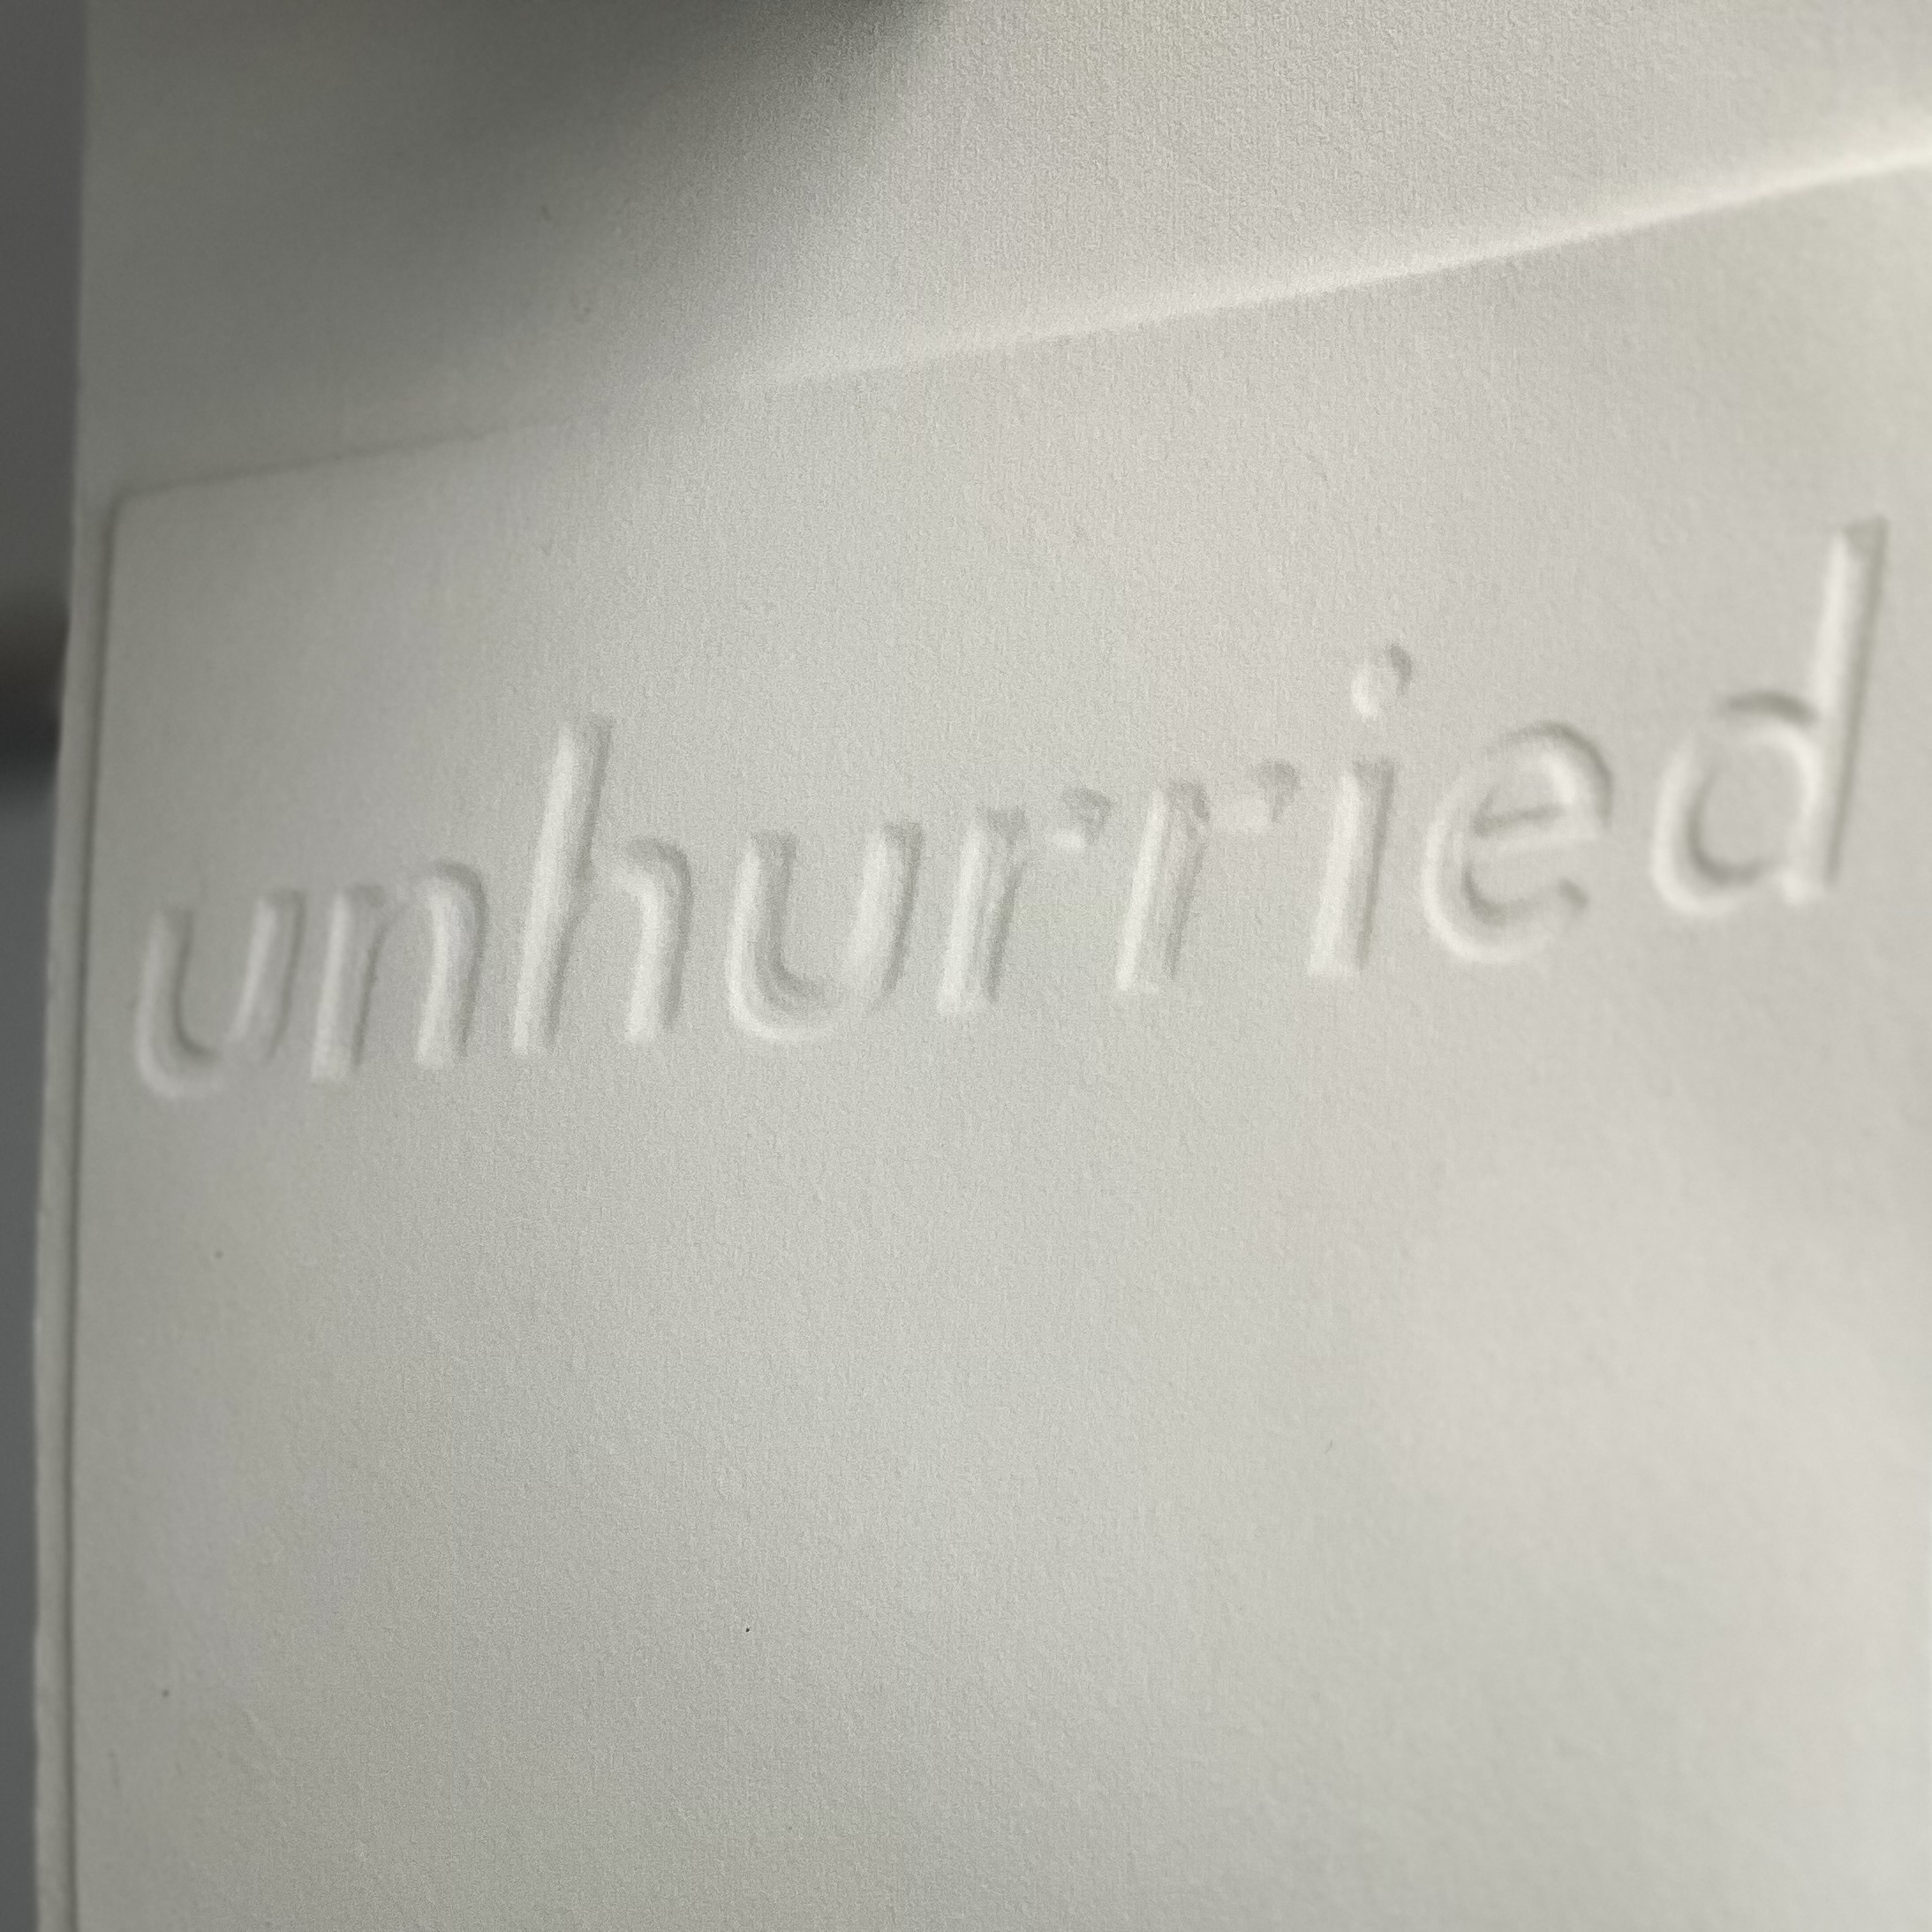 'Unhurried' embossing by Alice Clough